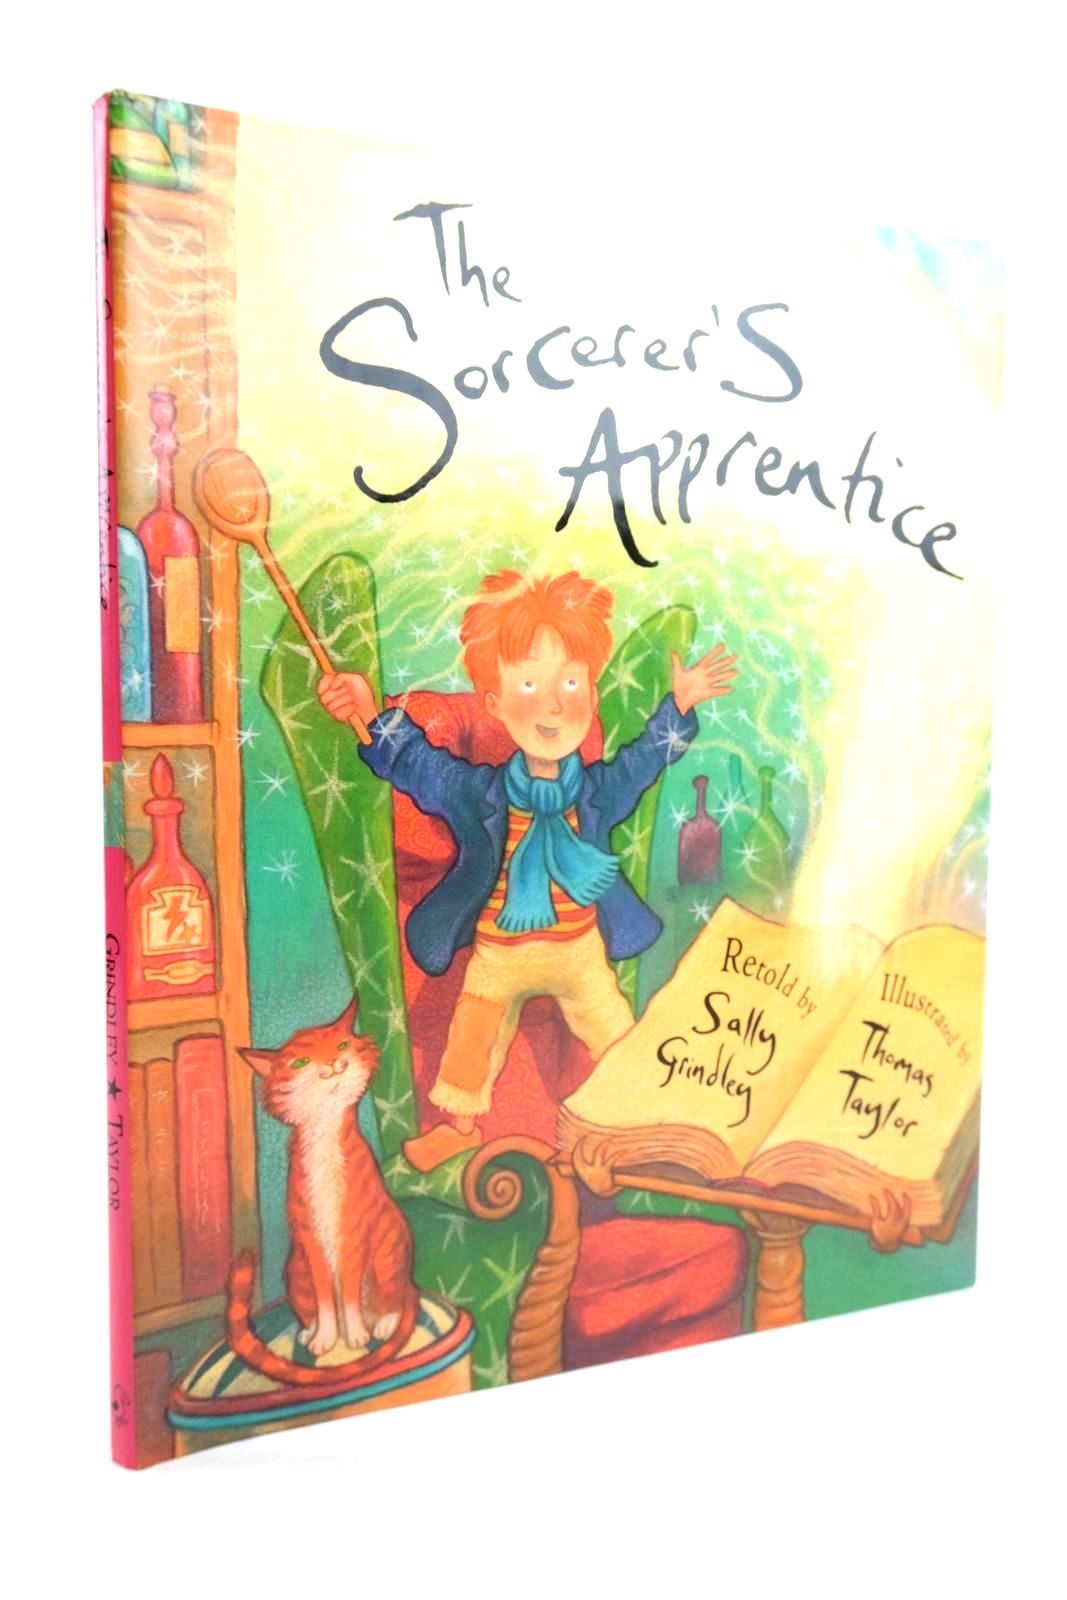 Photo of THE SORCERER'S APPRENTICE written by Grindley, Sally illustrated by Taylor, Thomas published by Gullane Children's Books (STOCK CODE: 1319894)  for sale by Stella & Rose's Books